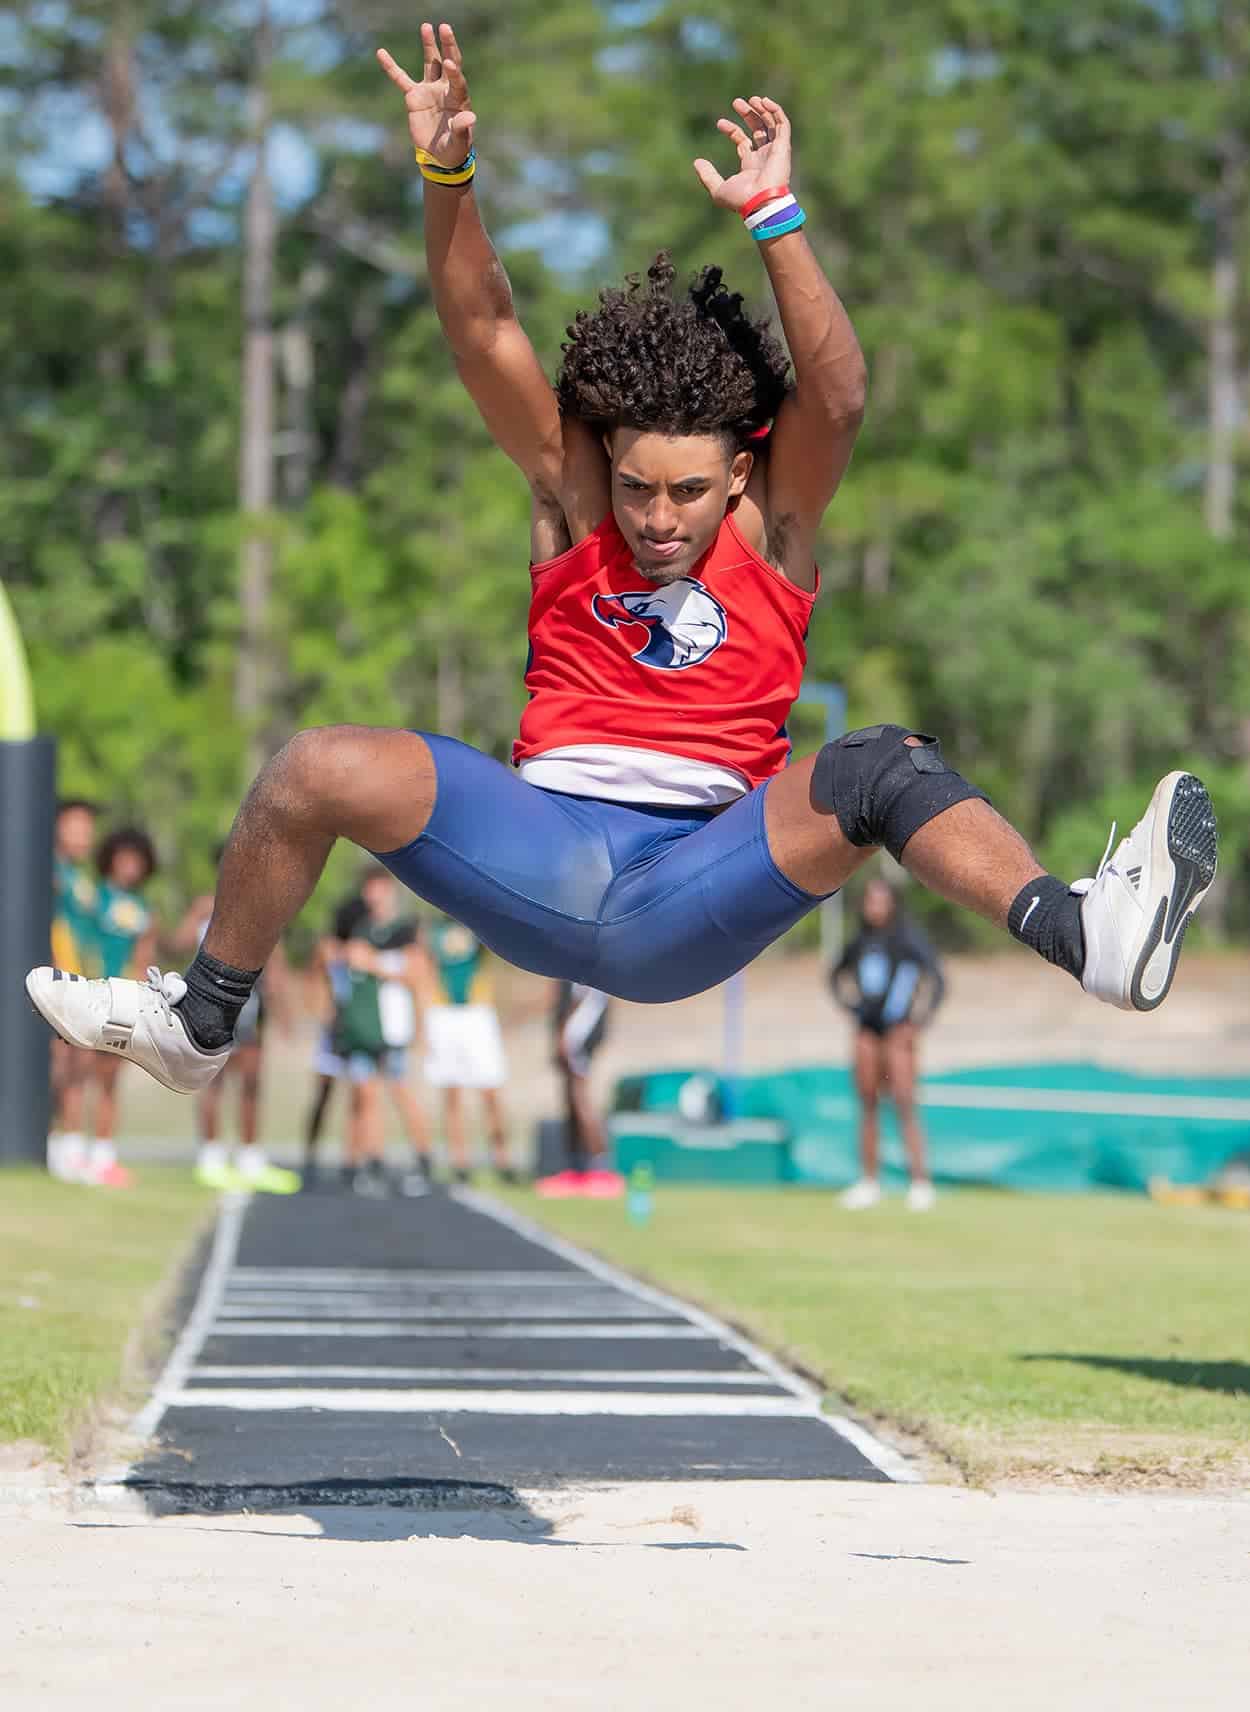 Springstead High’s Chadiell Echavarria takes flight in the long jump event at the GC8 Track and Field Championships at Weeki Wachee High School. Photo by [Joe DiCristofalo]